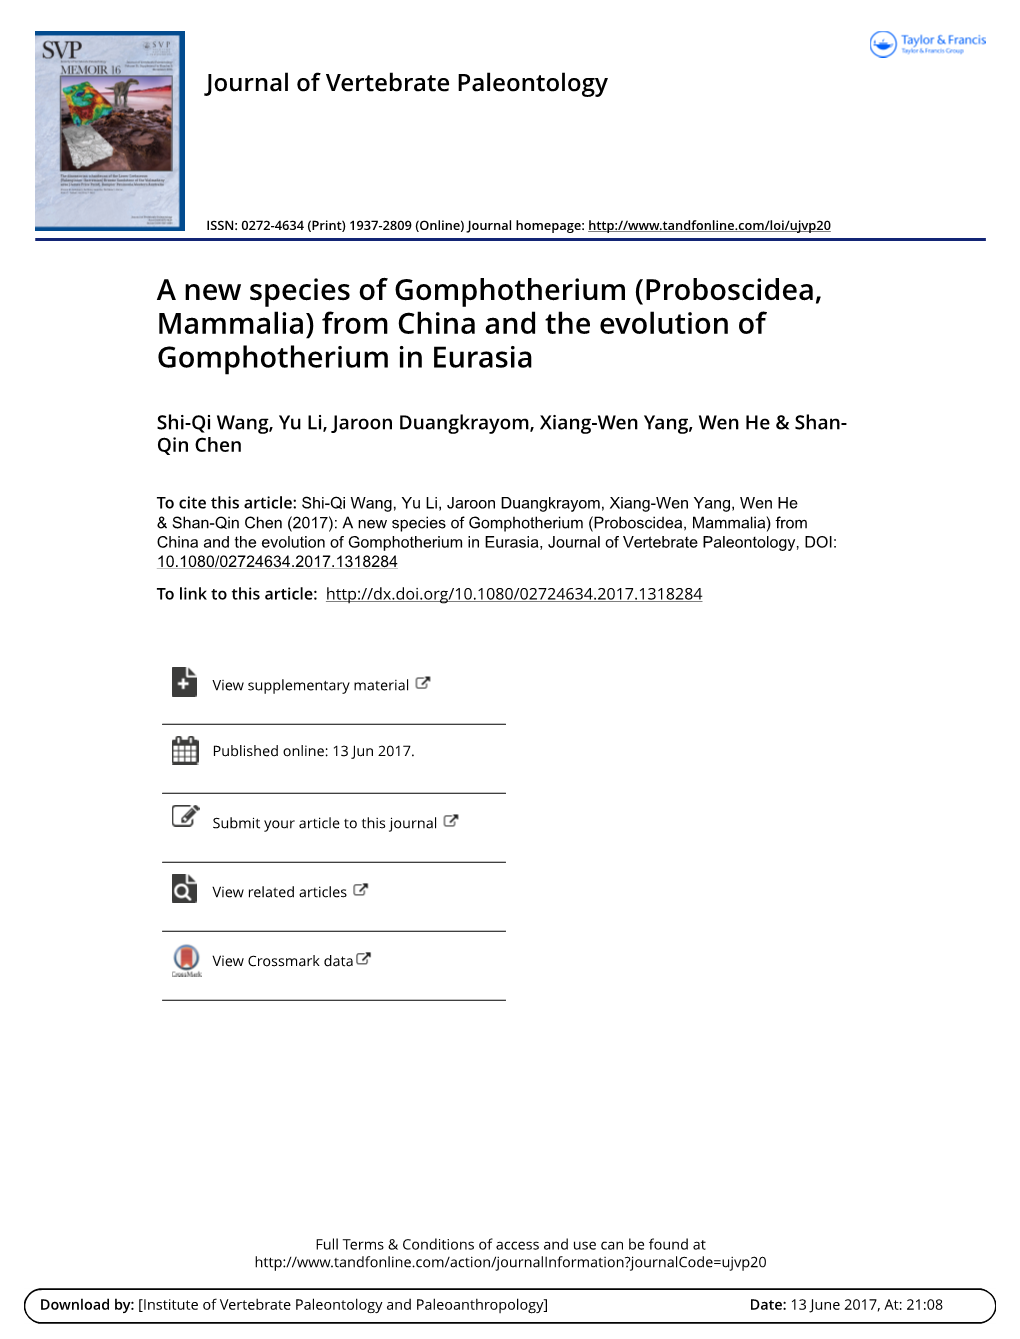 A New Species of Gomphotherium (Proboscidea, Mammalia) from China and the Evolution of Gomphotherium in Eurasia